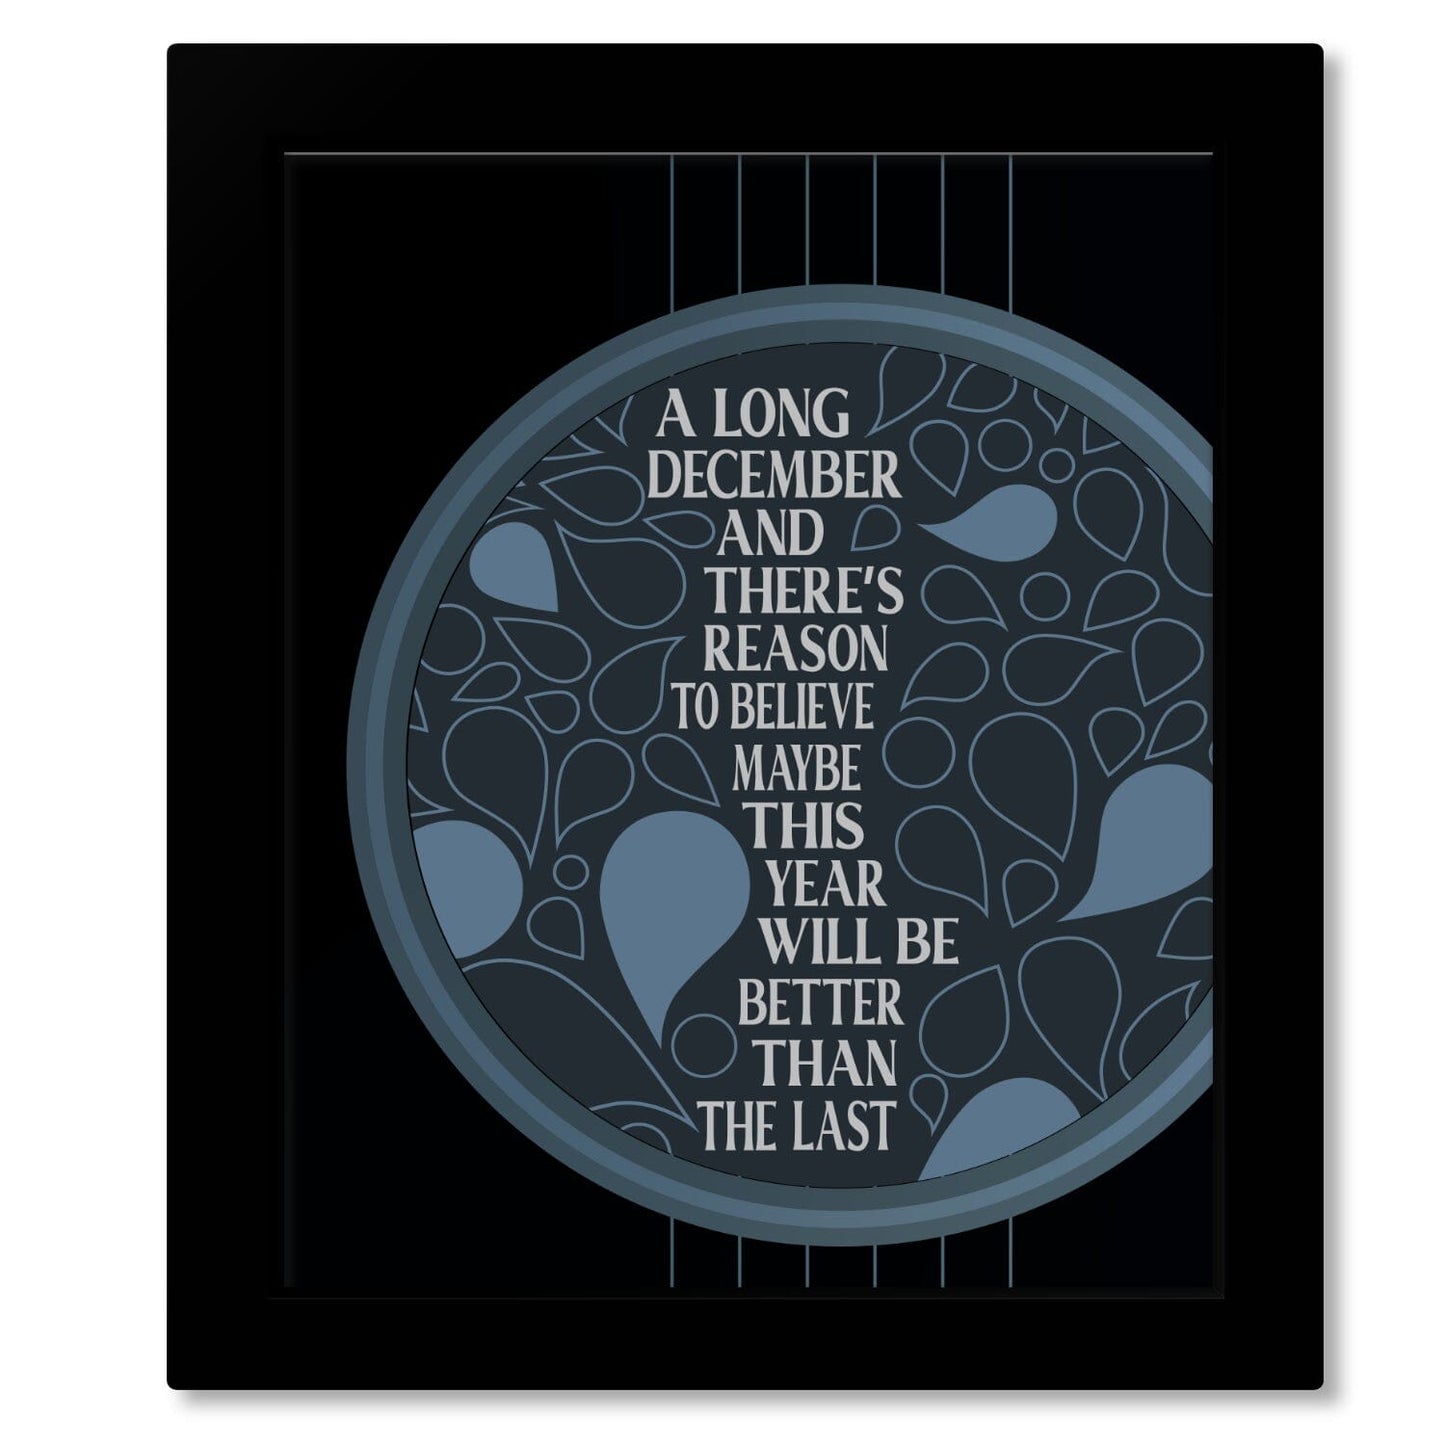 A Long December by the Counting Crows - Song Lyric Print Song Lyrics Art Song Lyrics Art 8x10 Framed Print (without mat) 